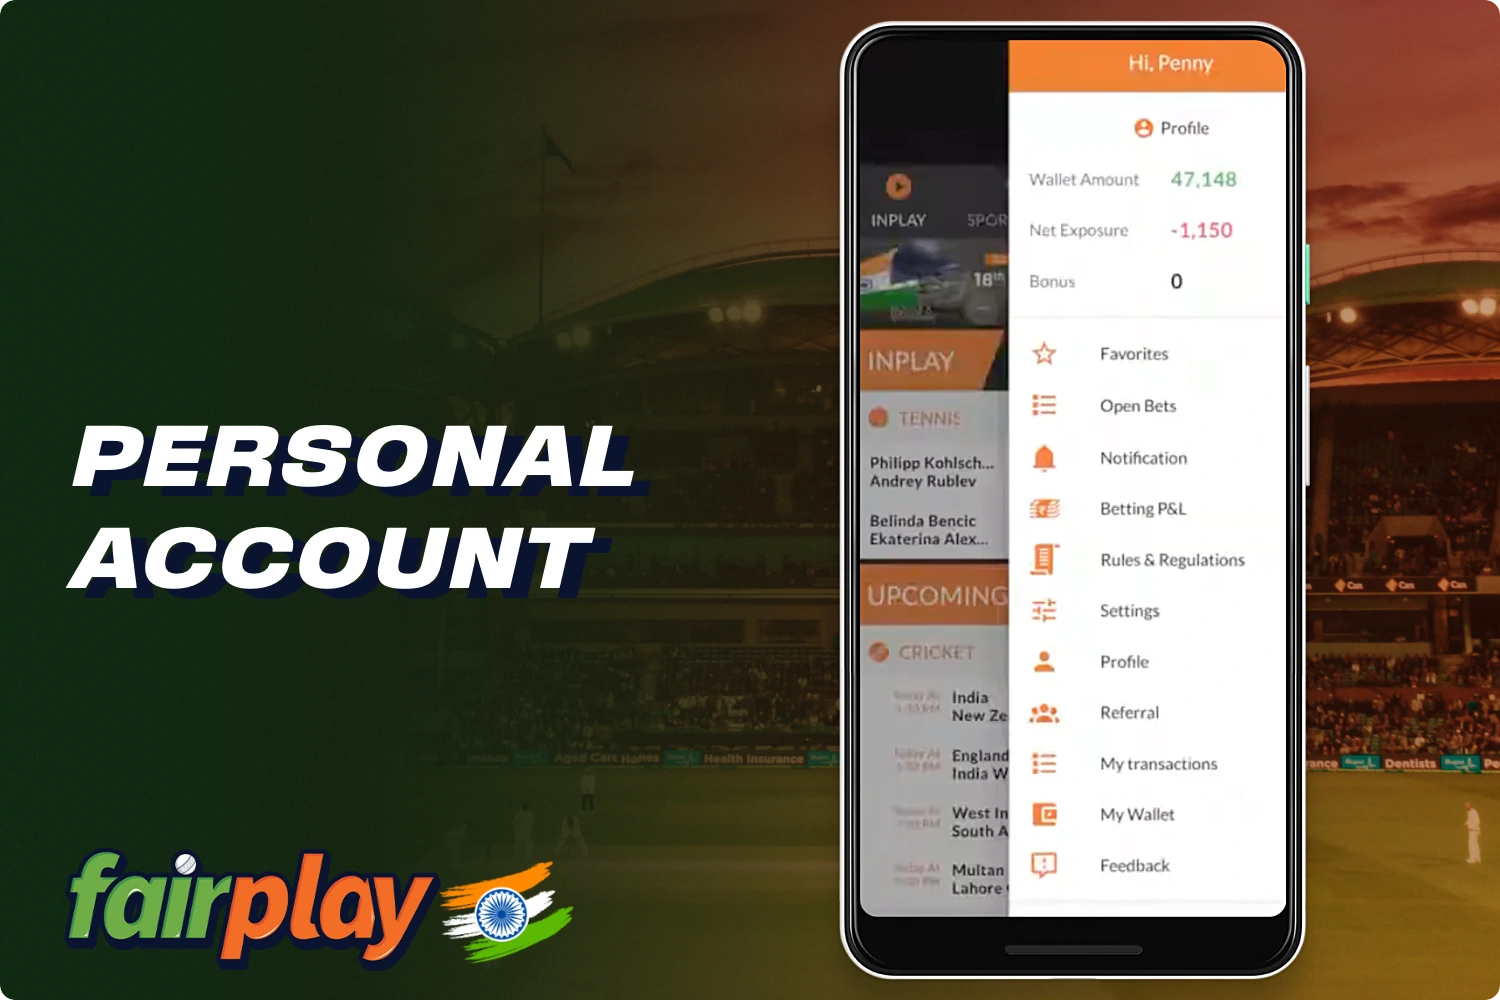 In Fairplay's personal account settings, users can change various data and also gain access to many of the platform's features